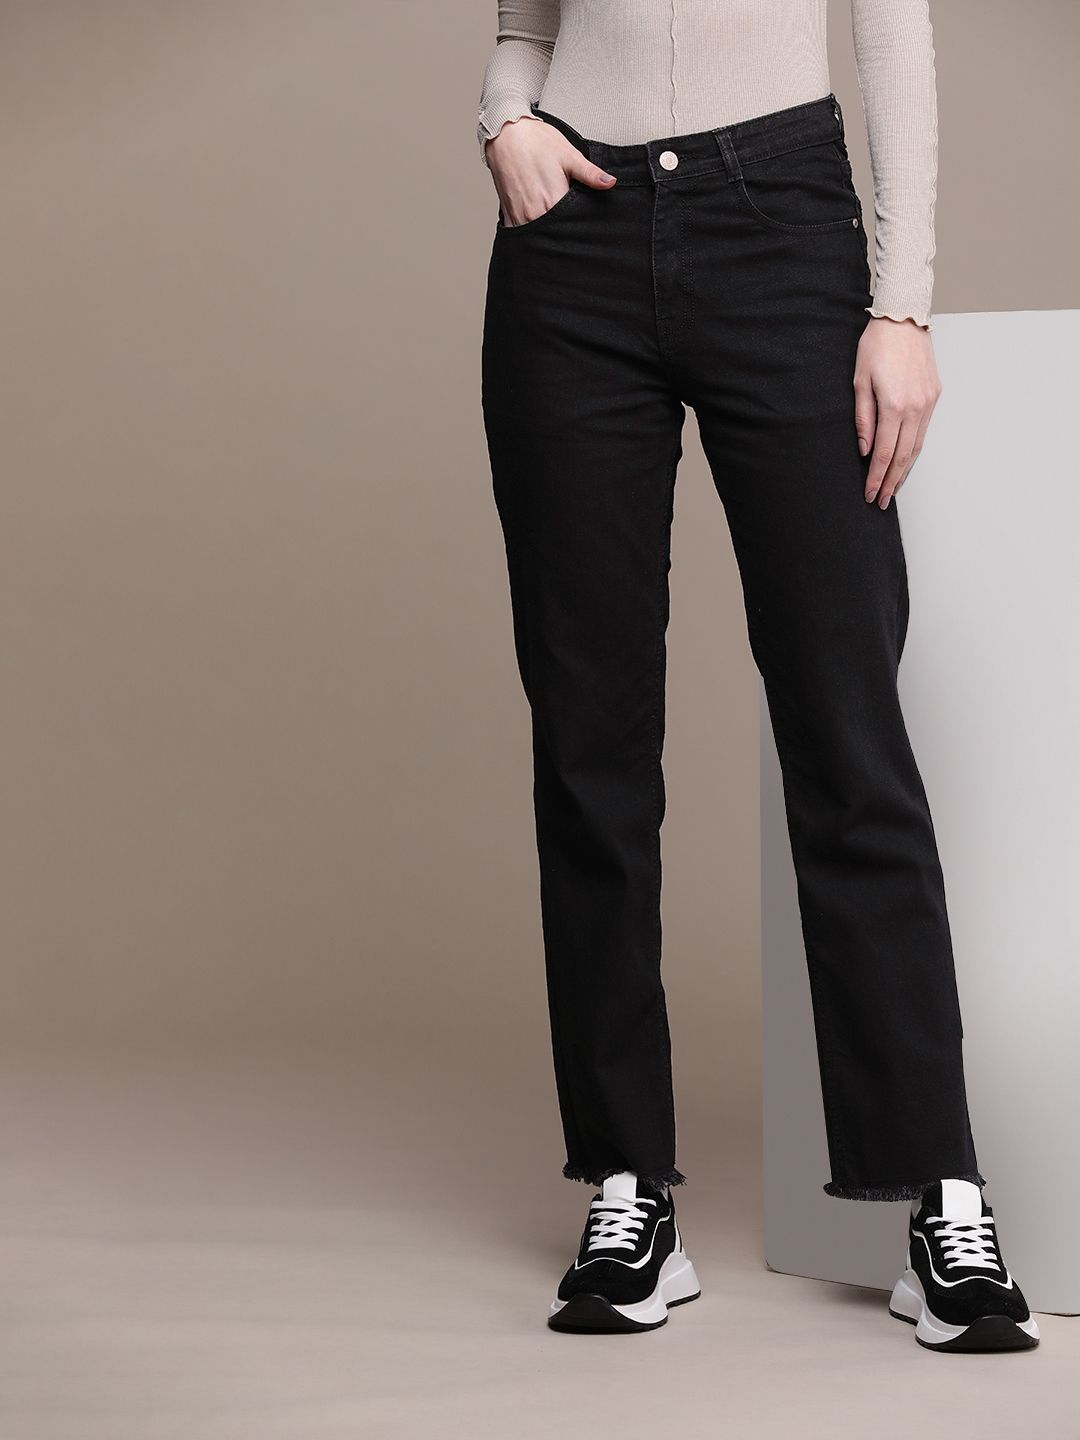 The Roadster Lifestyle Co. Women Straight Fit Stretchable Jeans